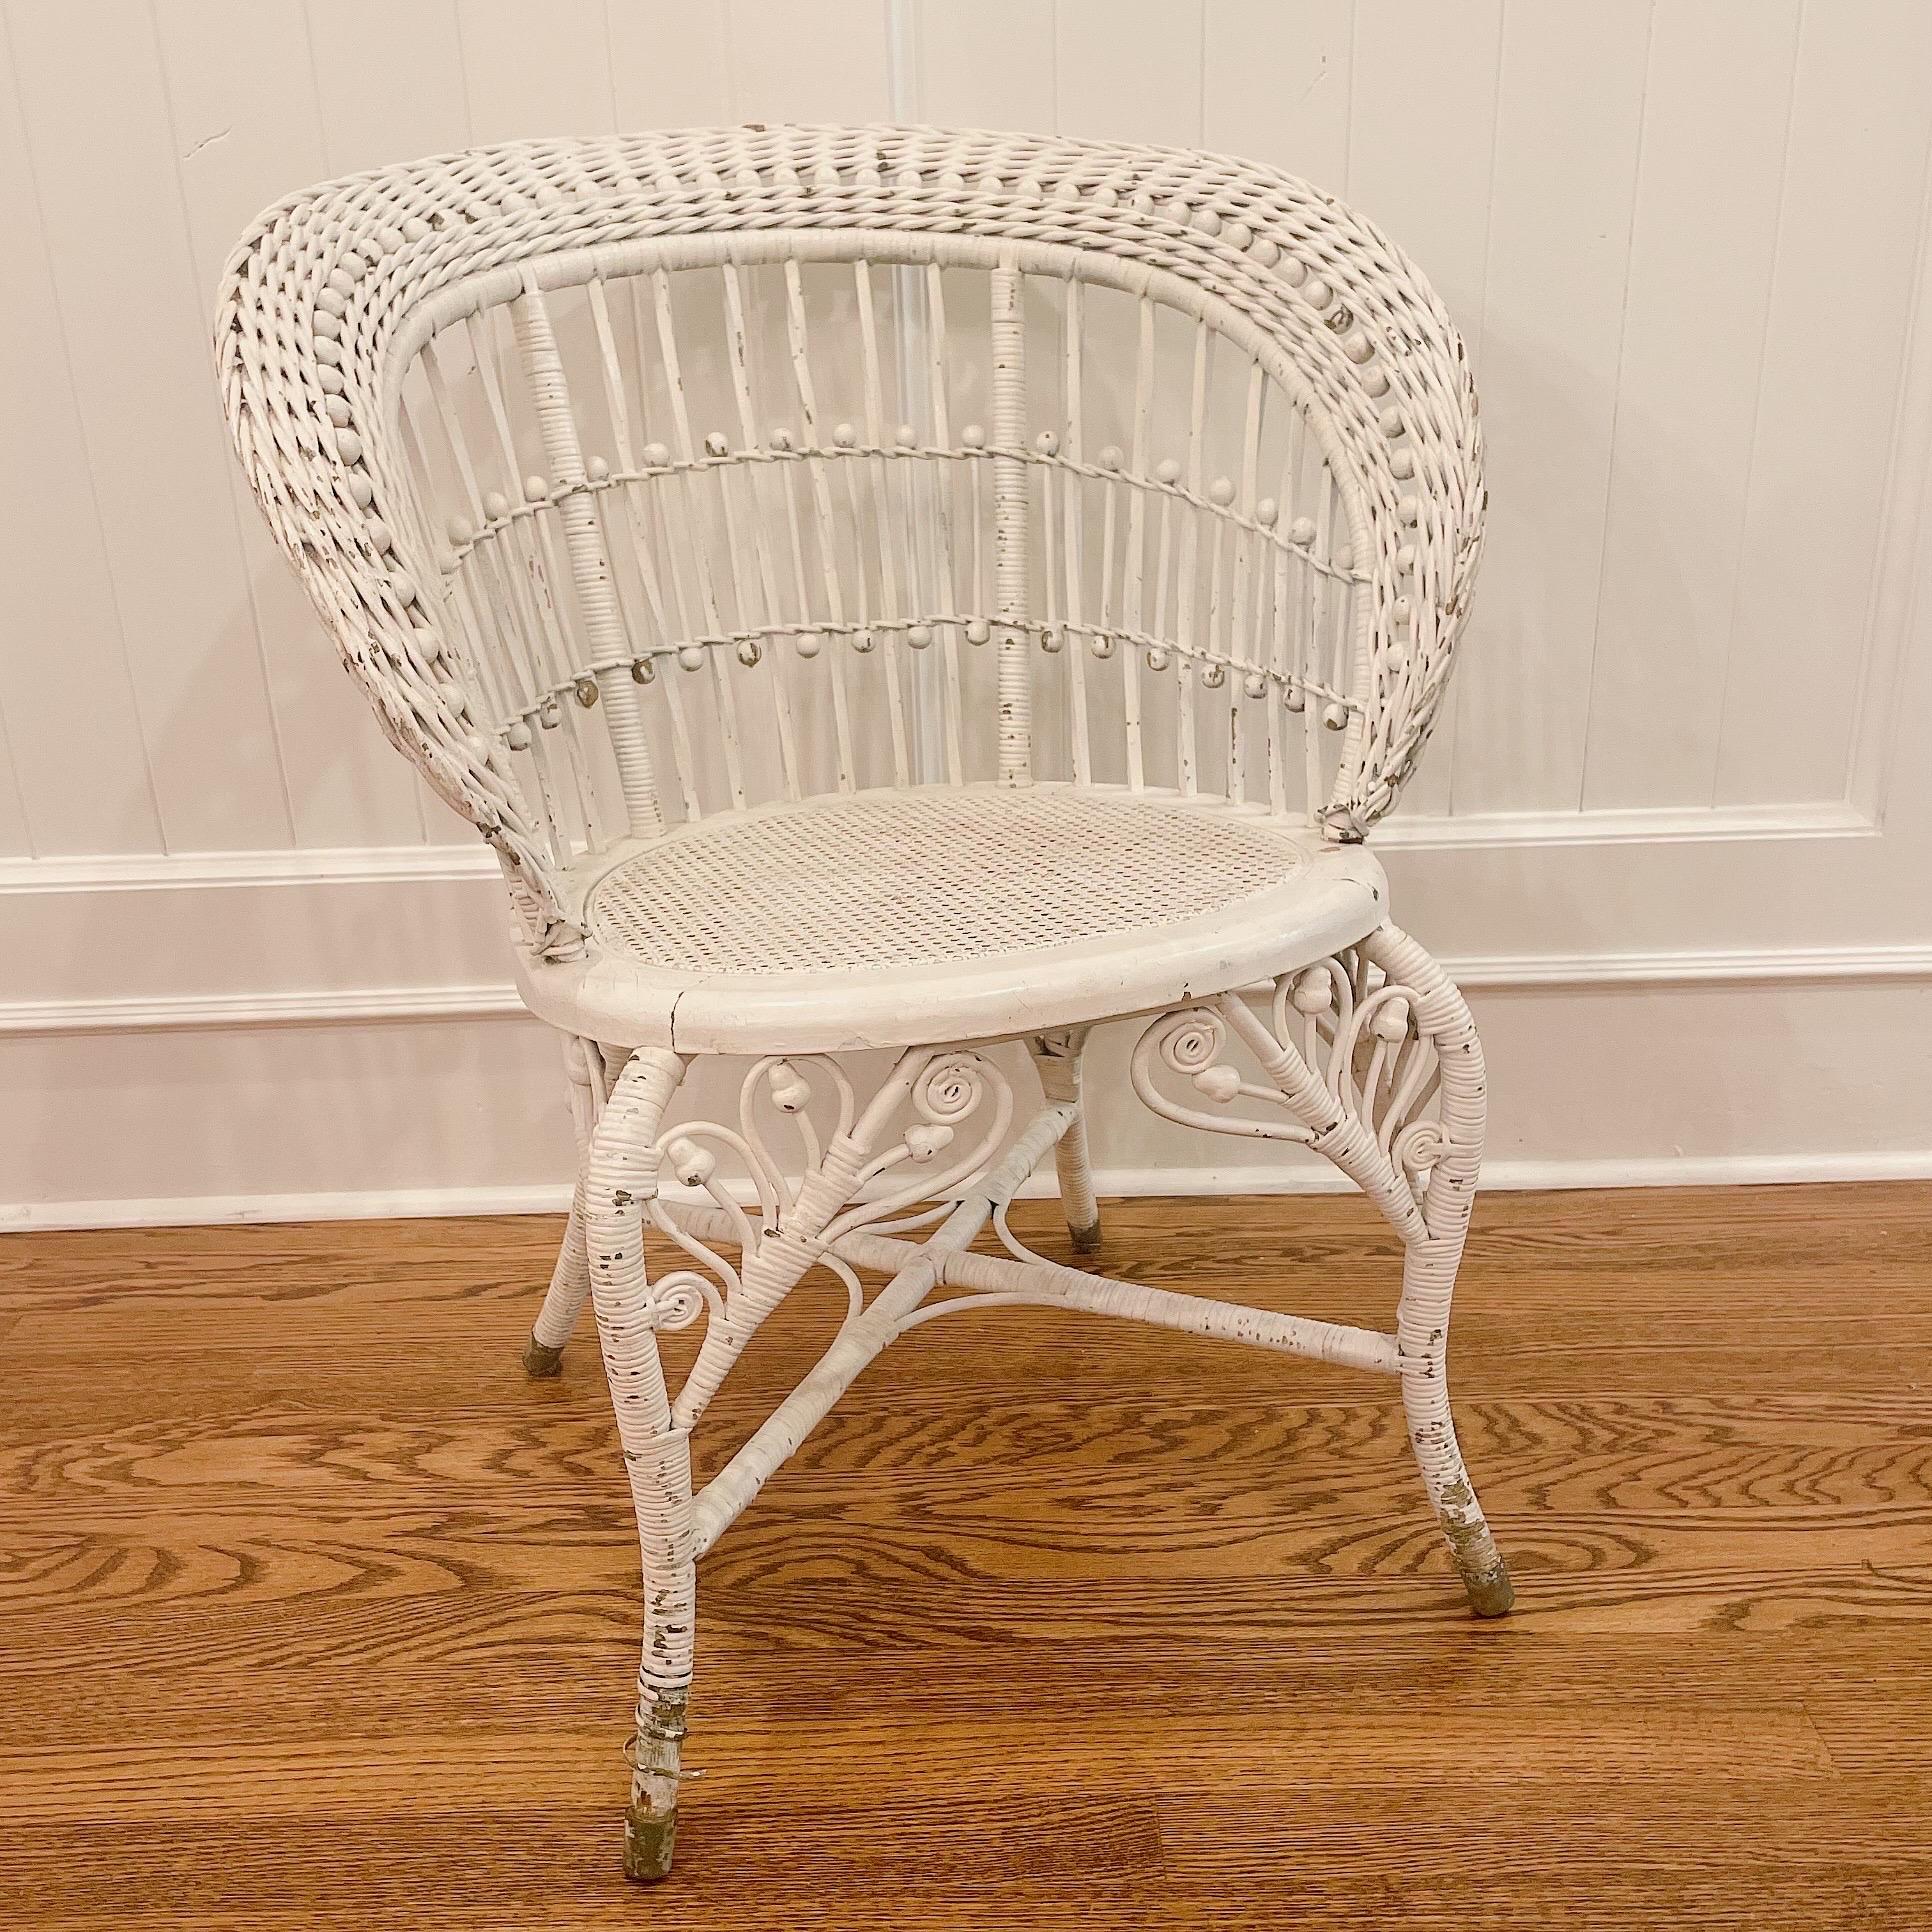 Antique Victorian Heywood Wakefield (attr) Ball & Stick Wicker Chair, Circa 1890 In Good Condition For Sale In Cookeville, TN